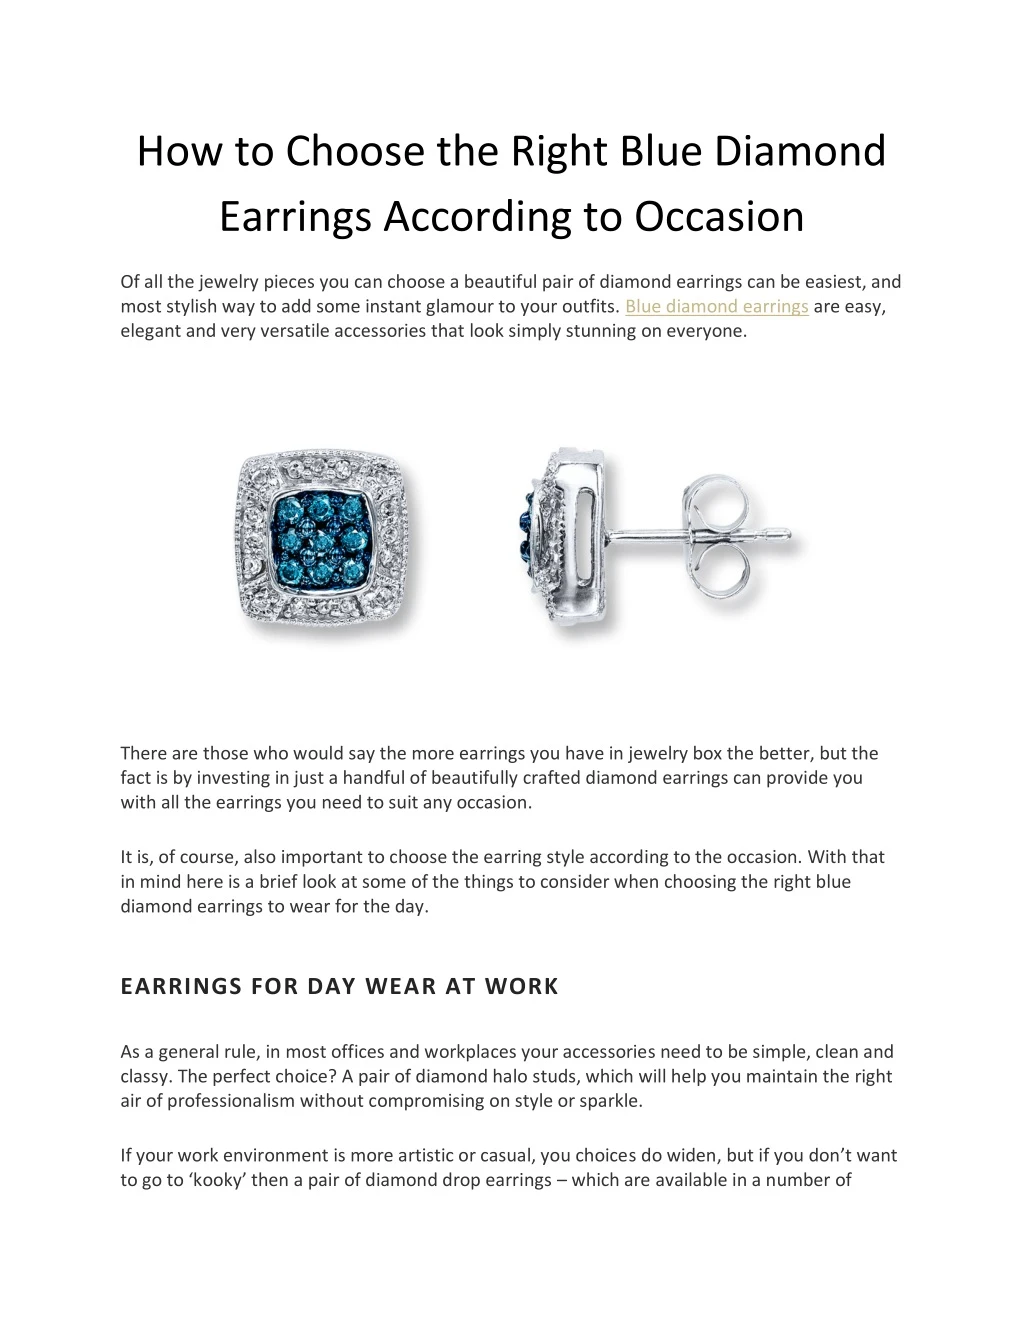 how to choose the right blue diamond earrings